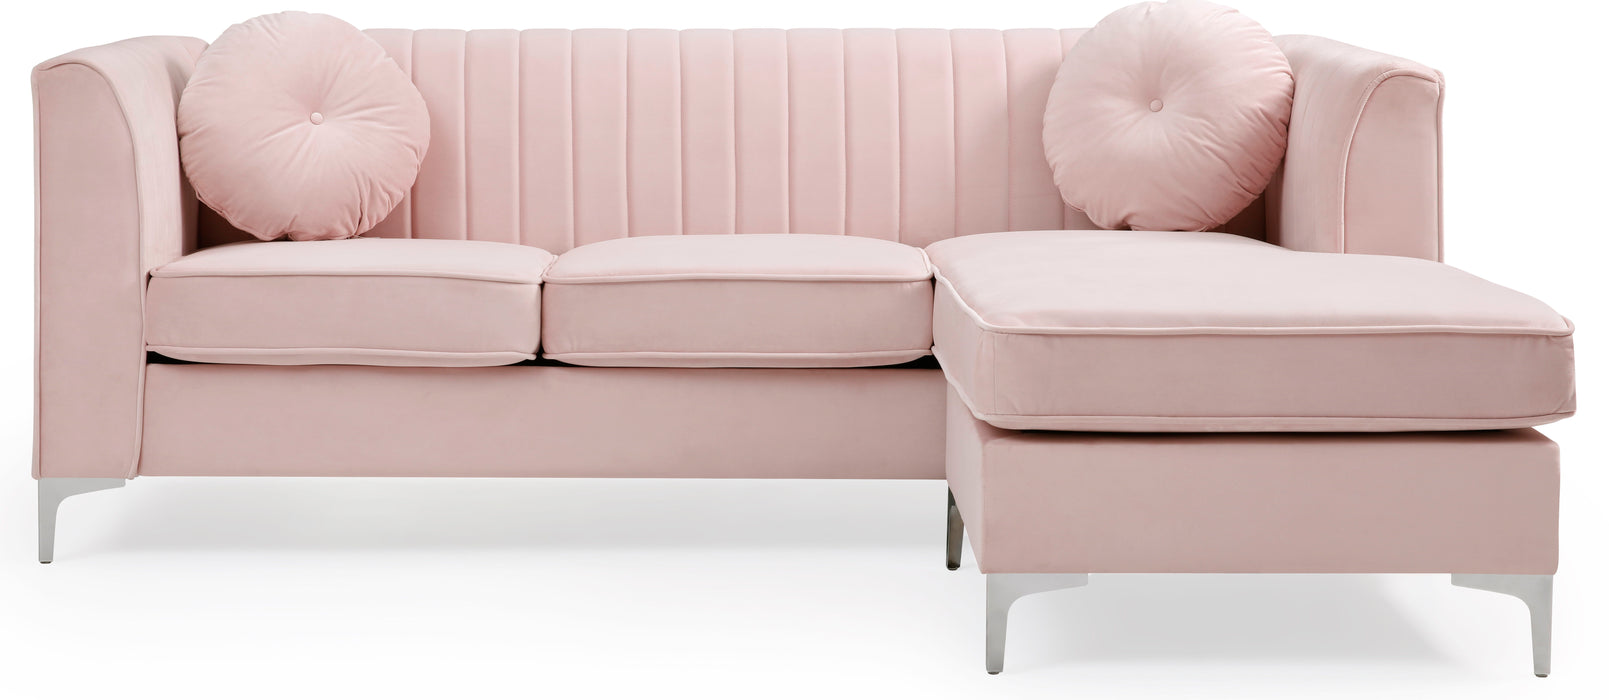 Delray - G794B-SC Sofa Chaise (3 Boxes) - Pink